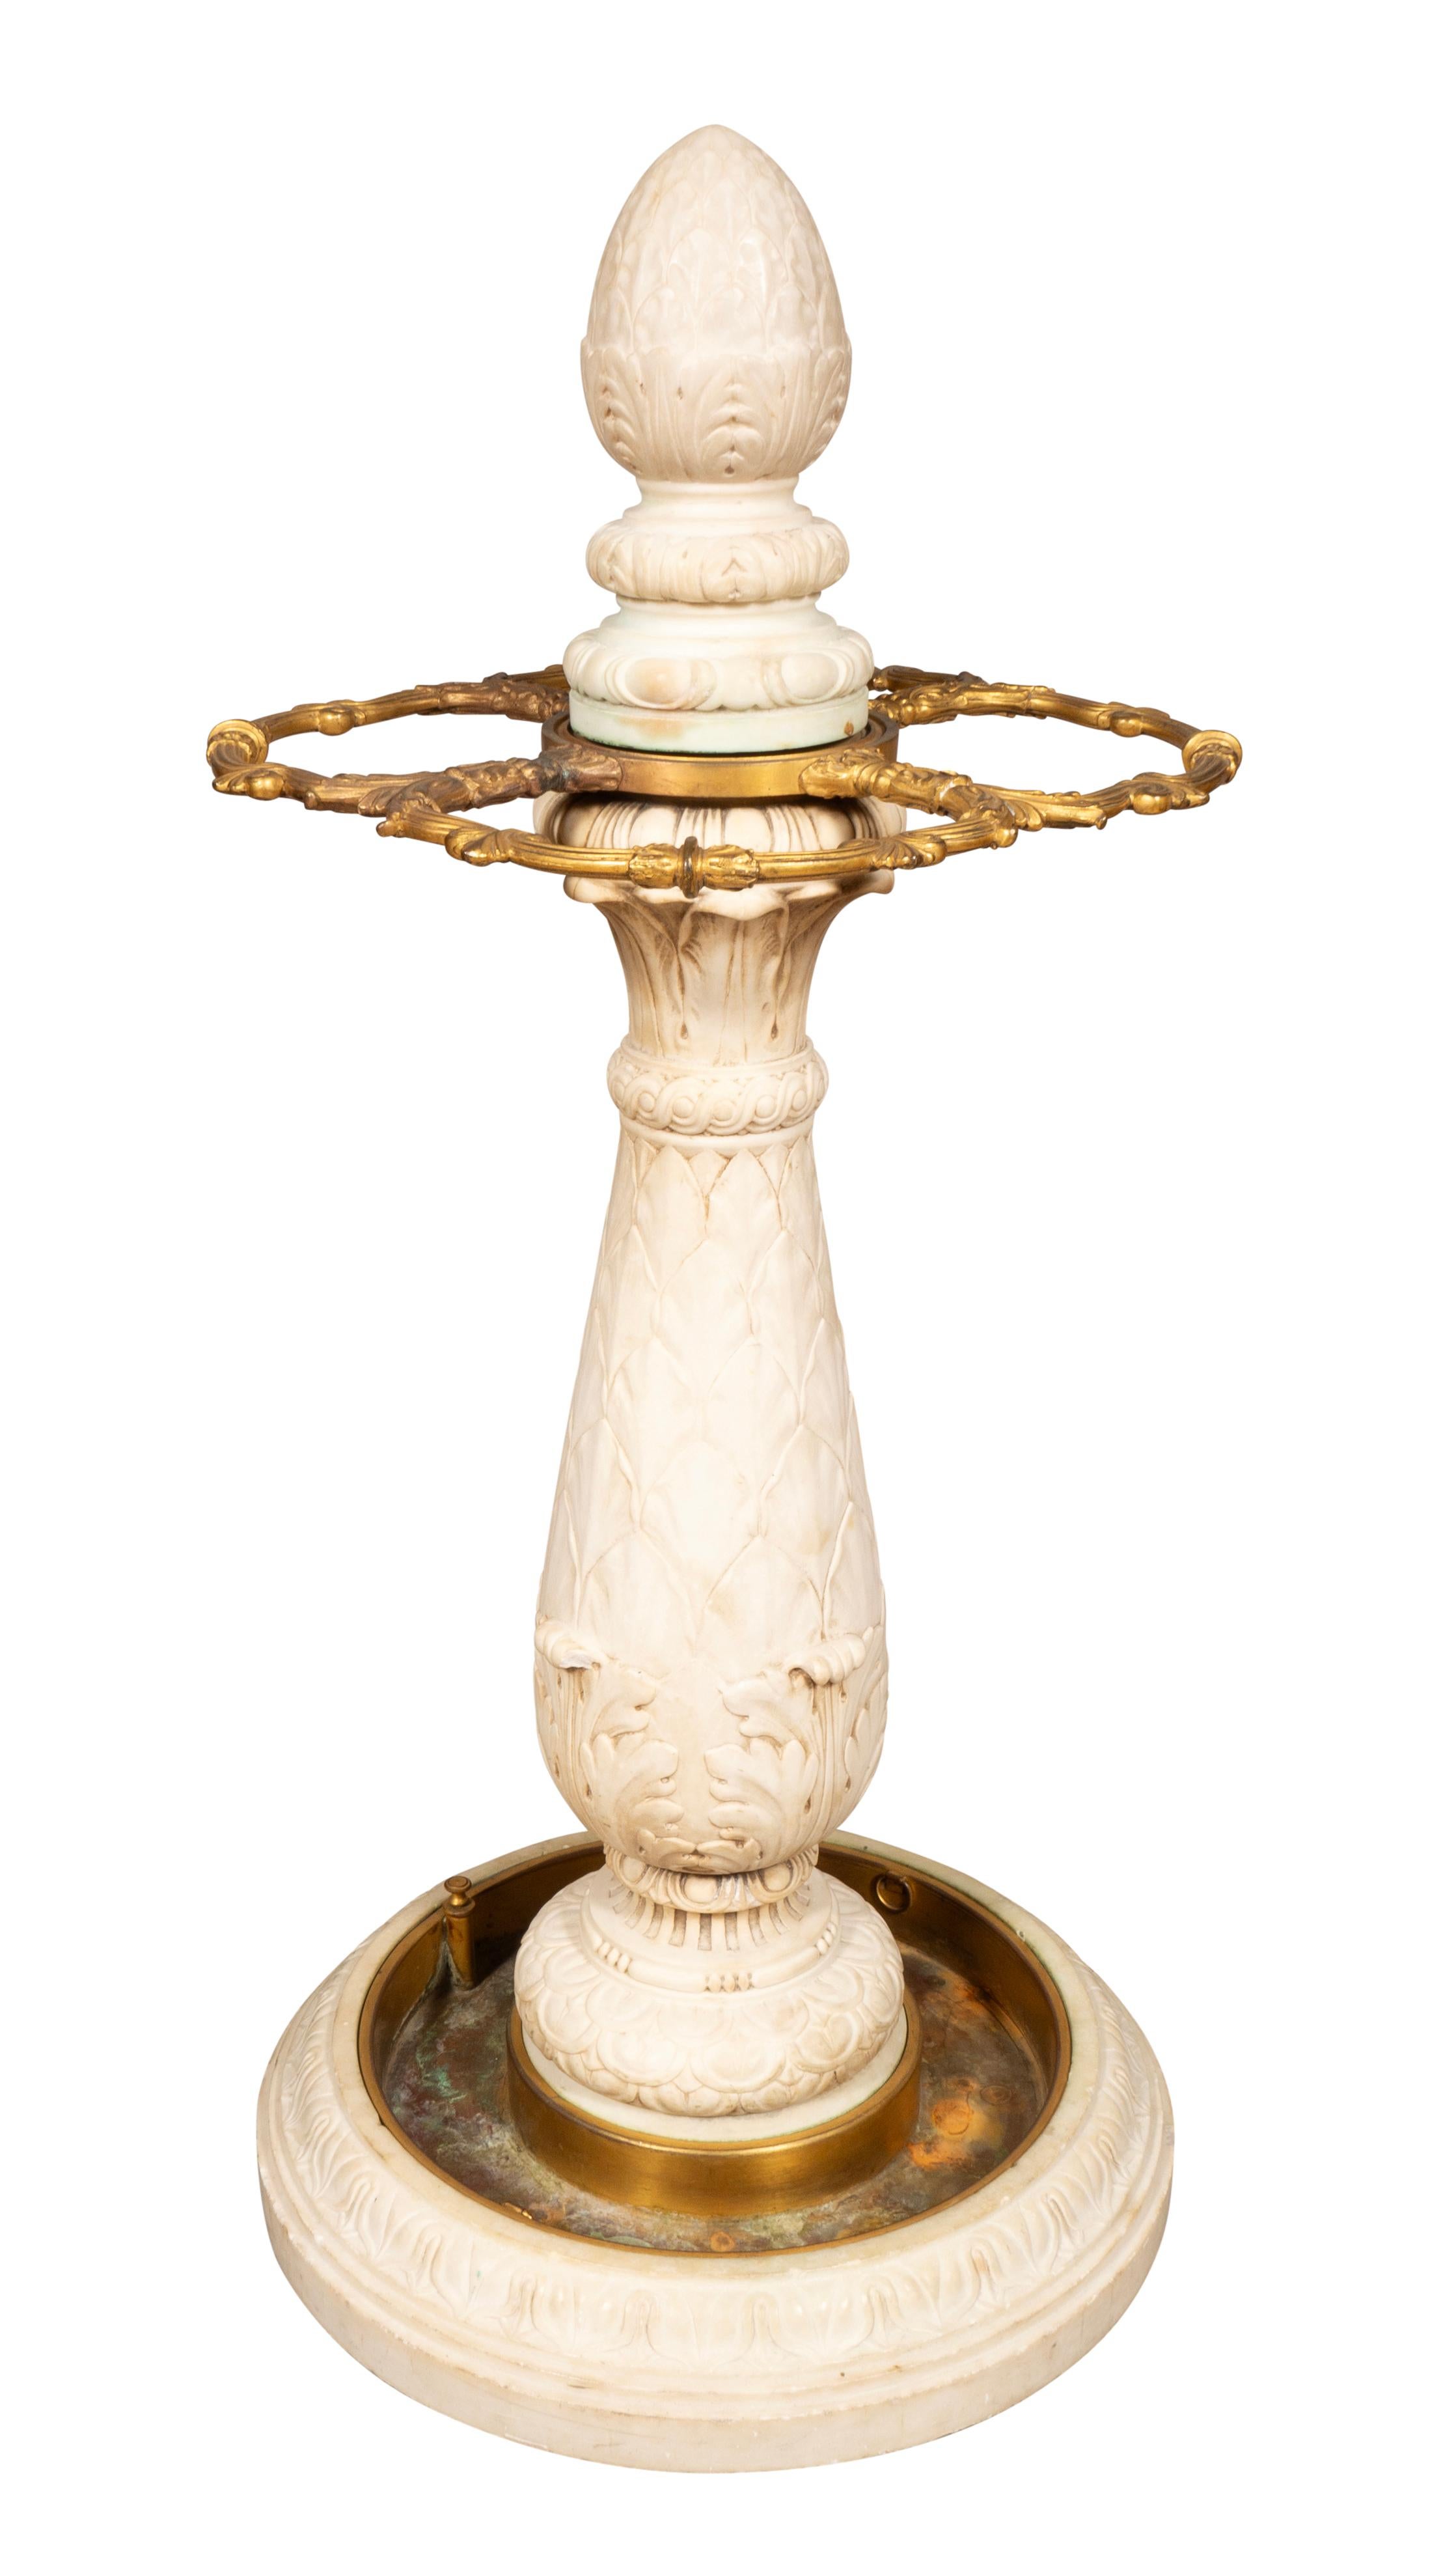 Neoclassical Revival Edward F. Caldwell Marble And Bronze Umbrella Stand For Sale